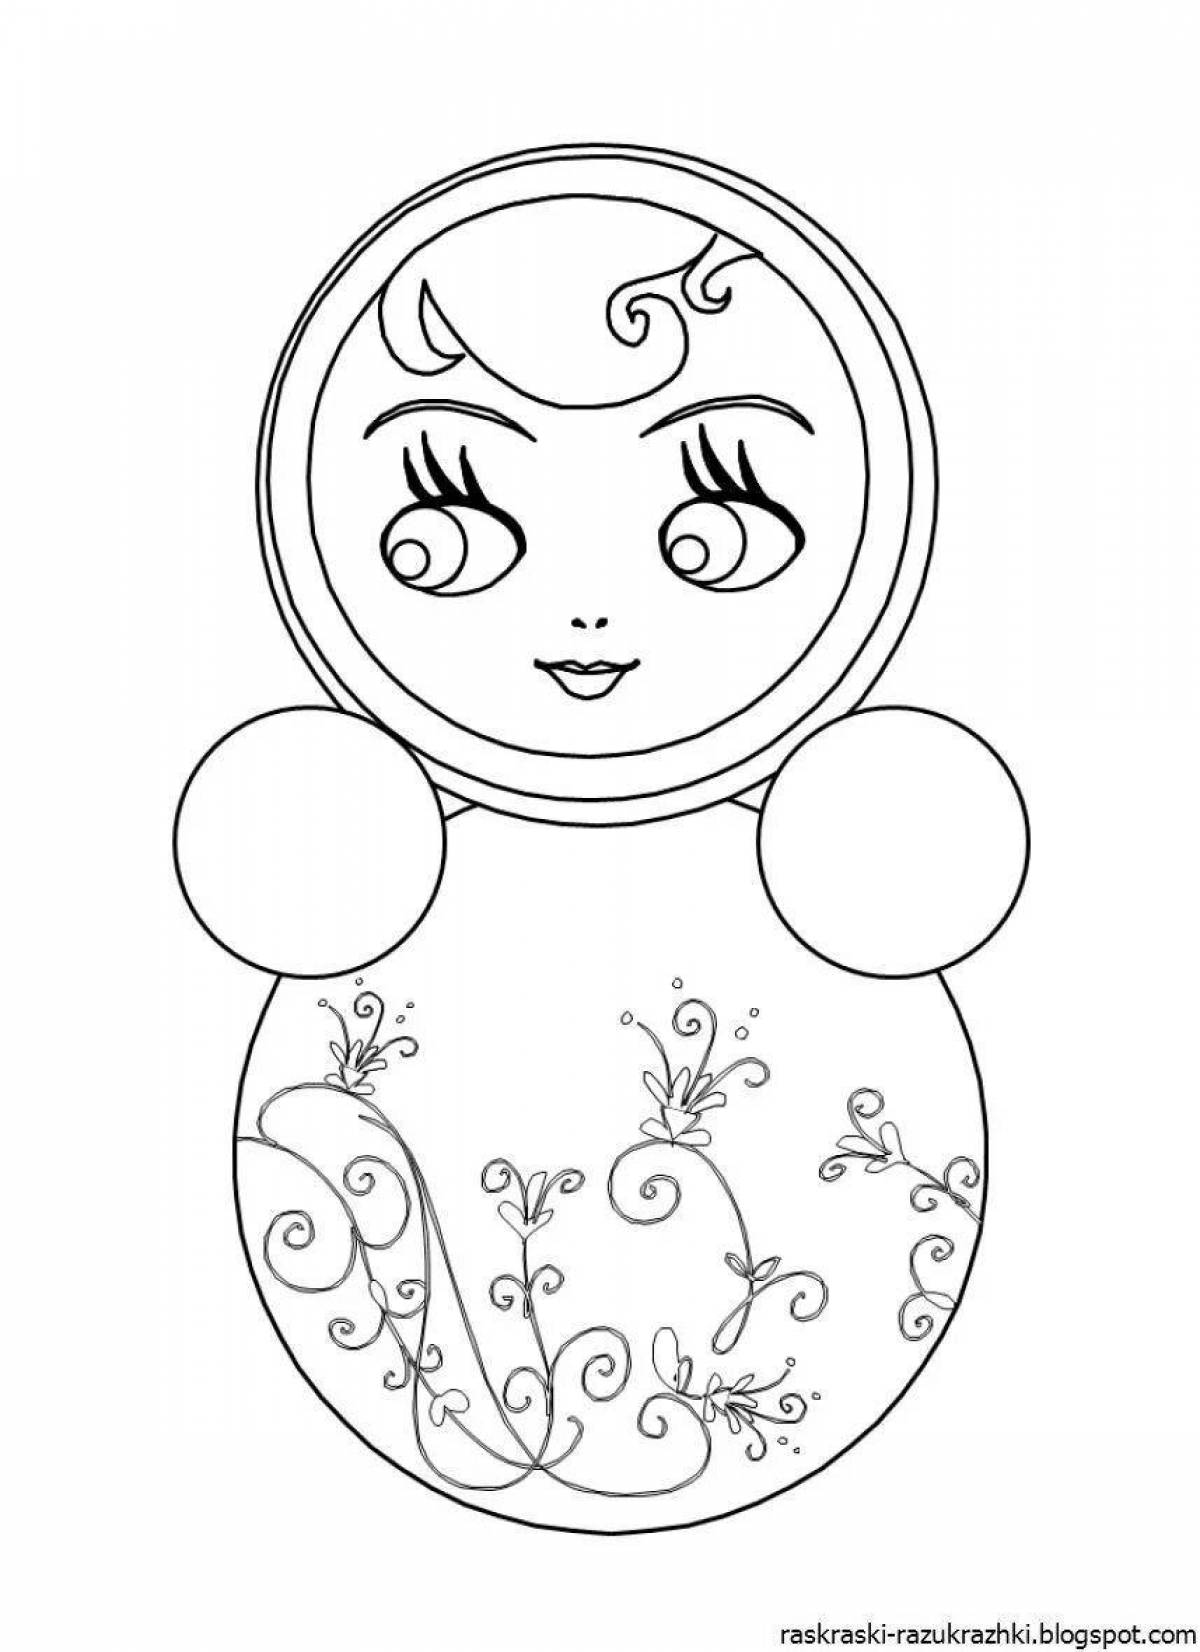 Color-bright tumbler coloring page for kids